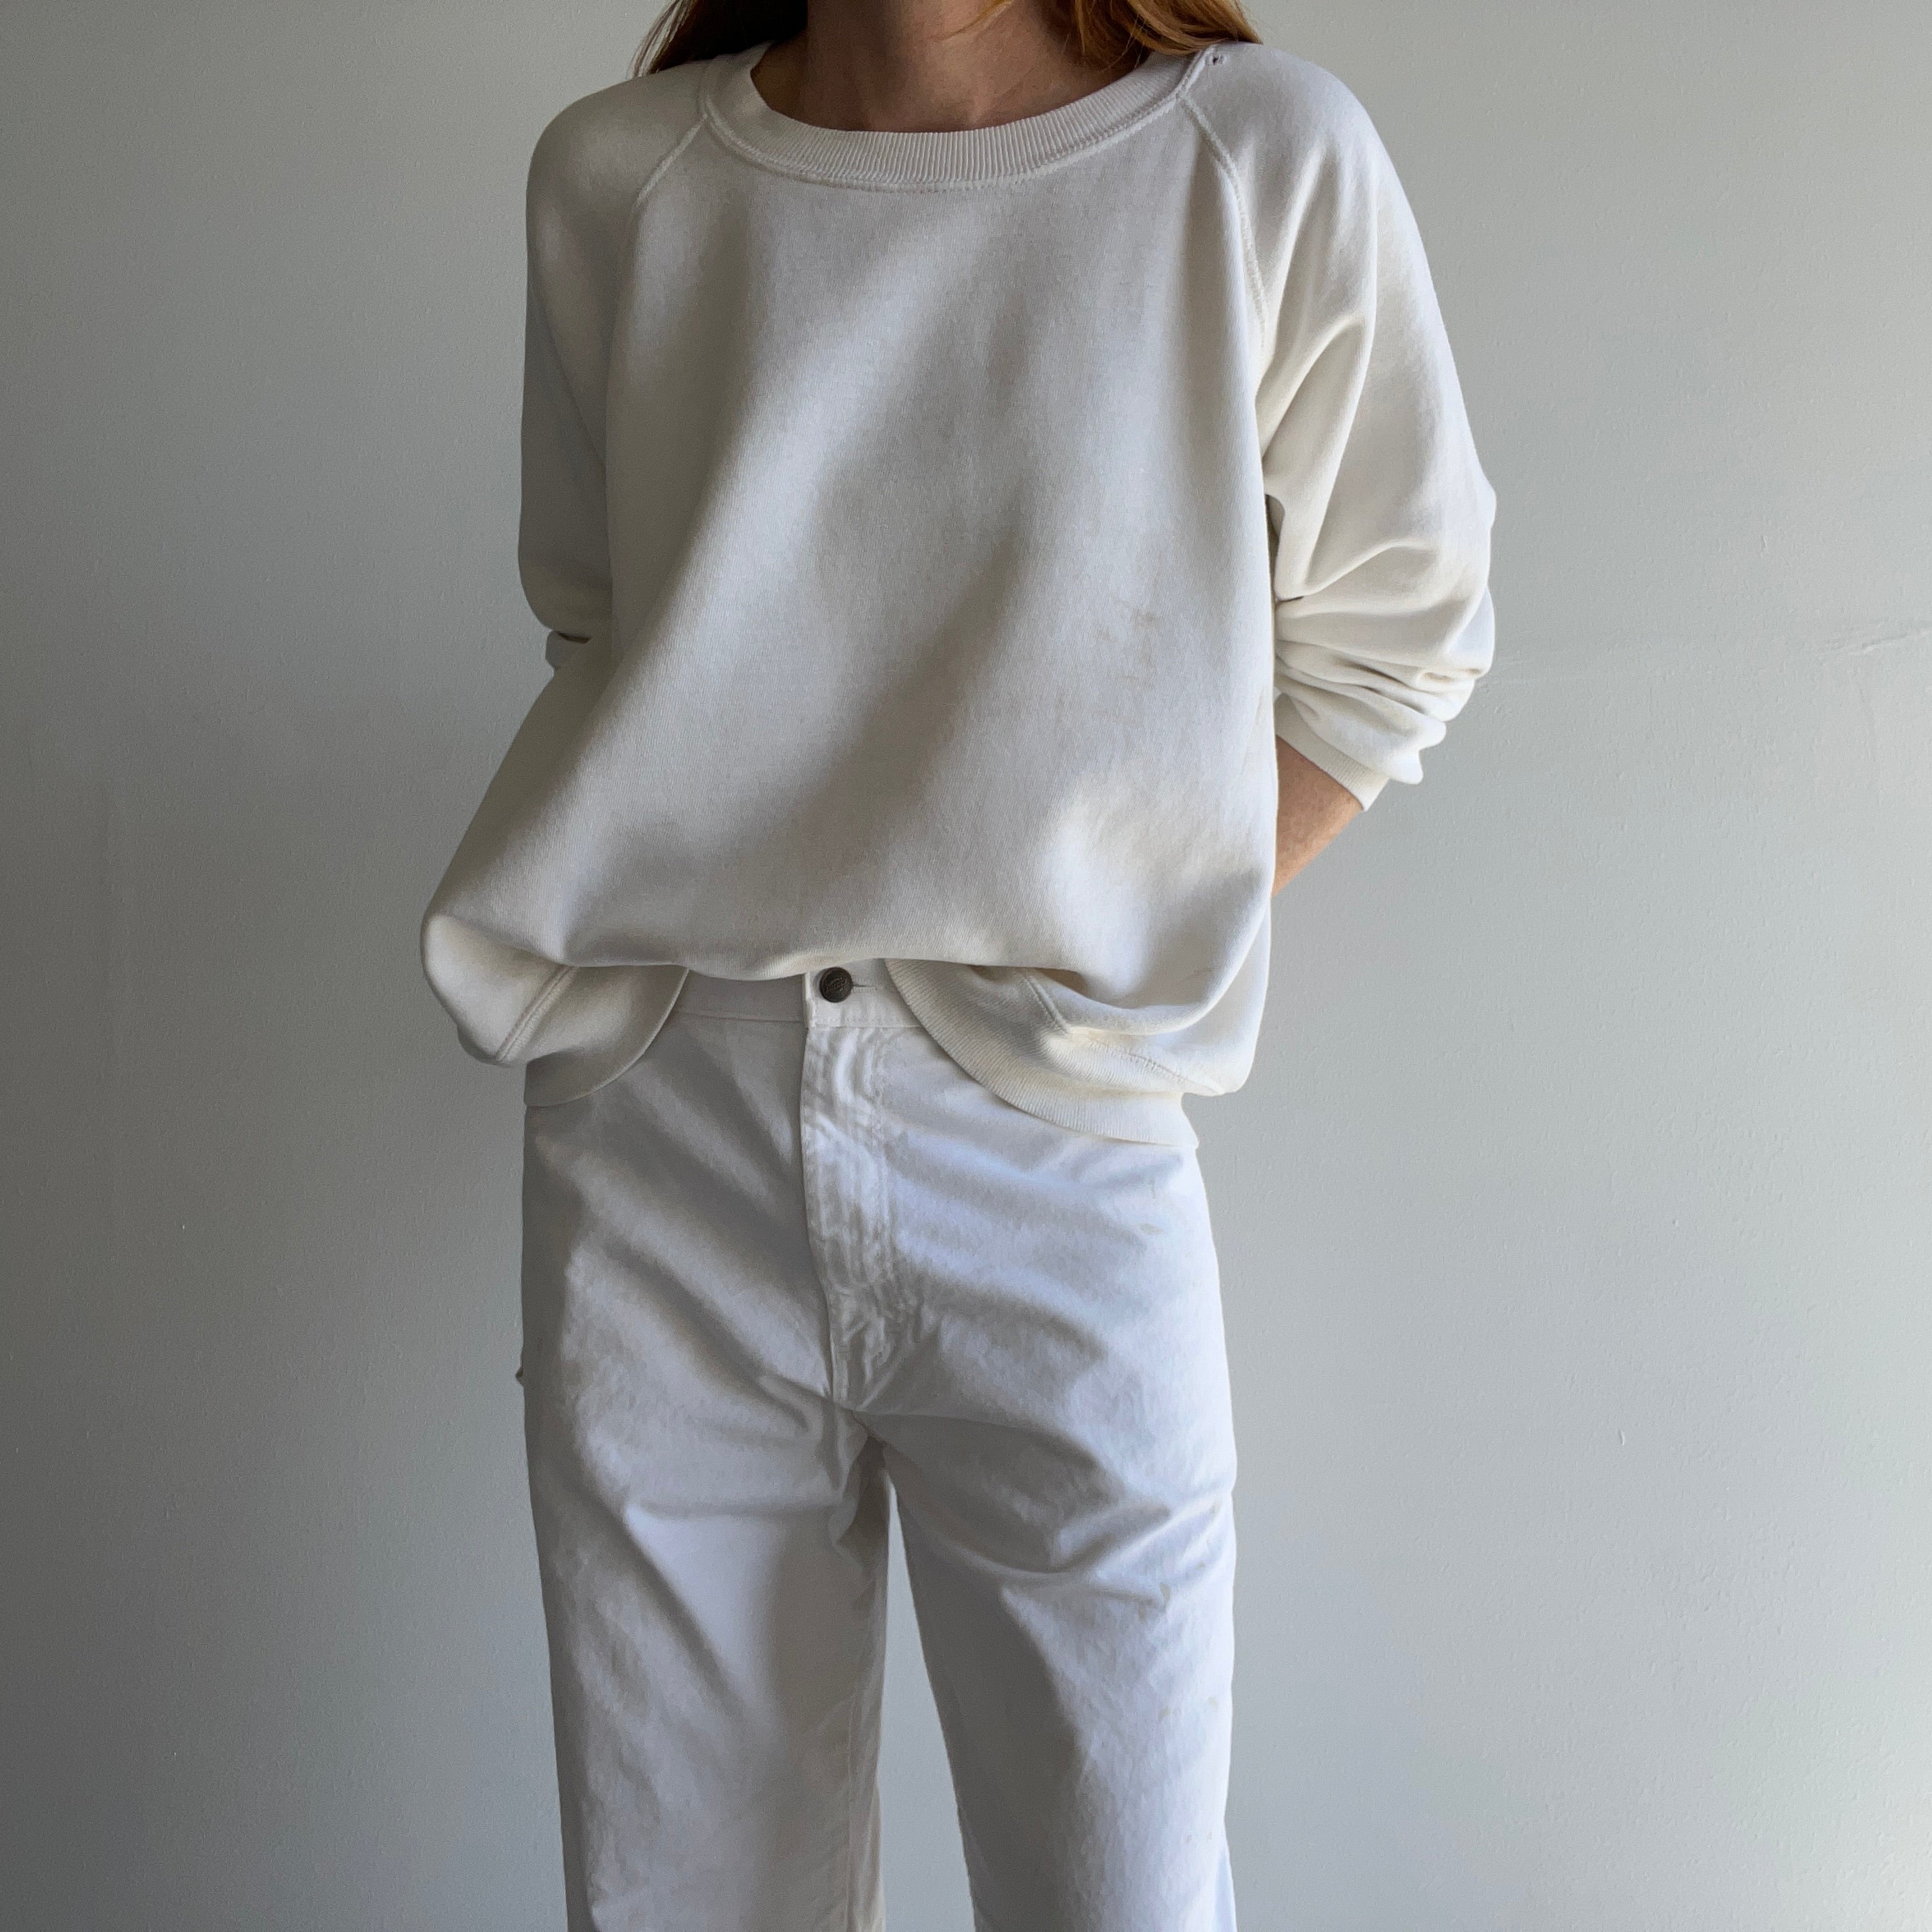 1970s Super Stained in The Best Ways Luxurious White/Ecru Sweatshirt - I want this!